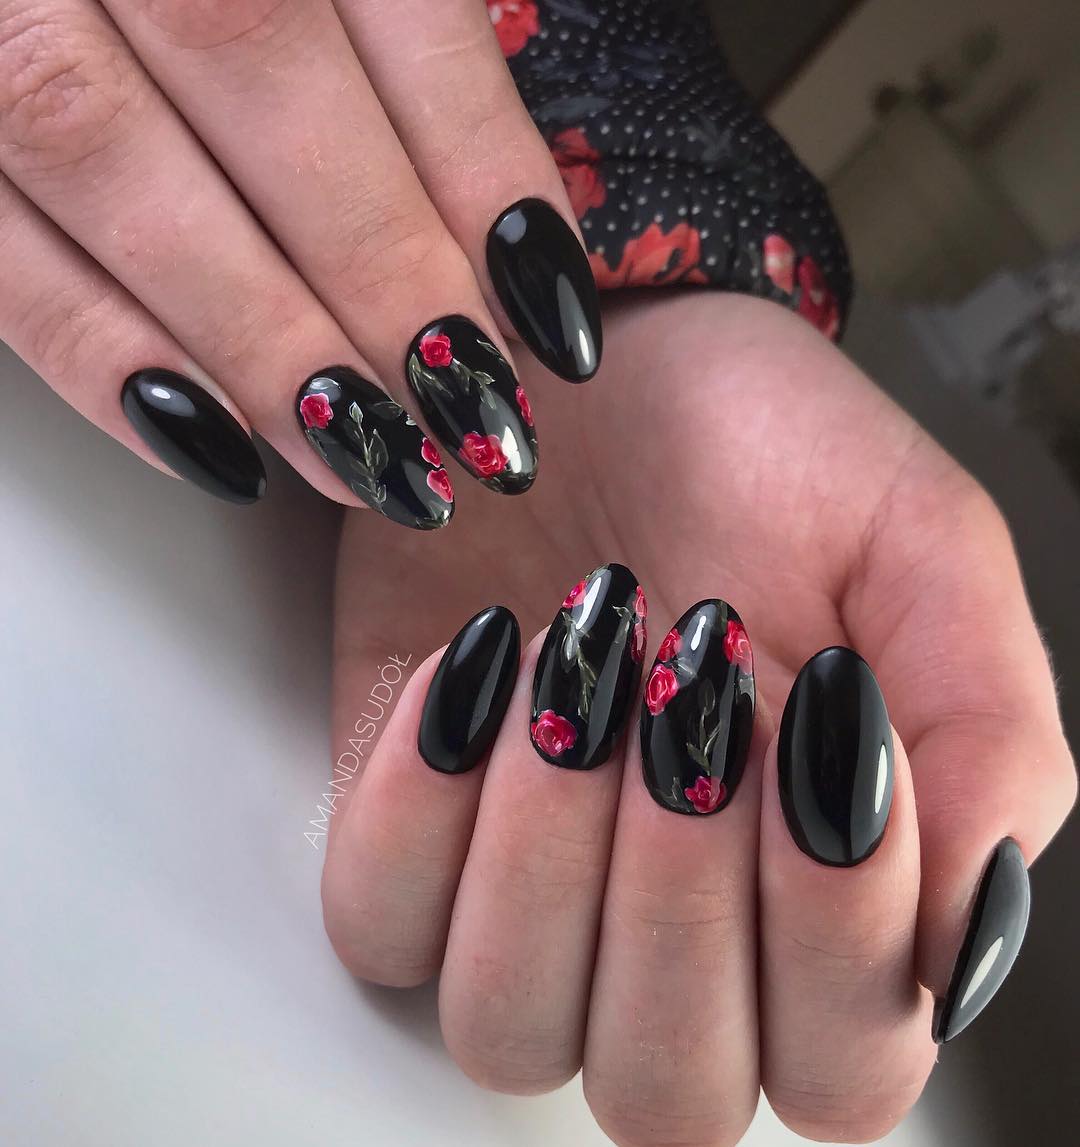 Roses with thorns on nails for halloween 2020